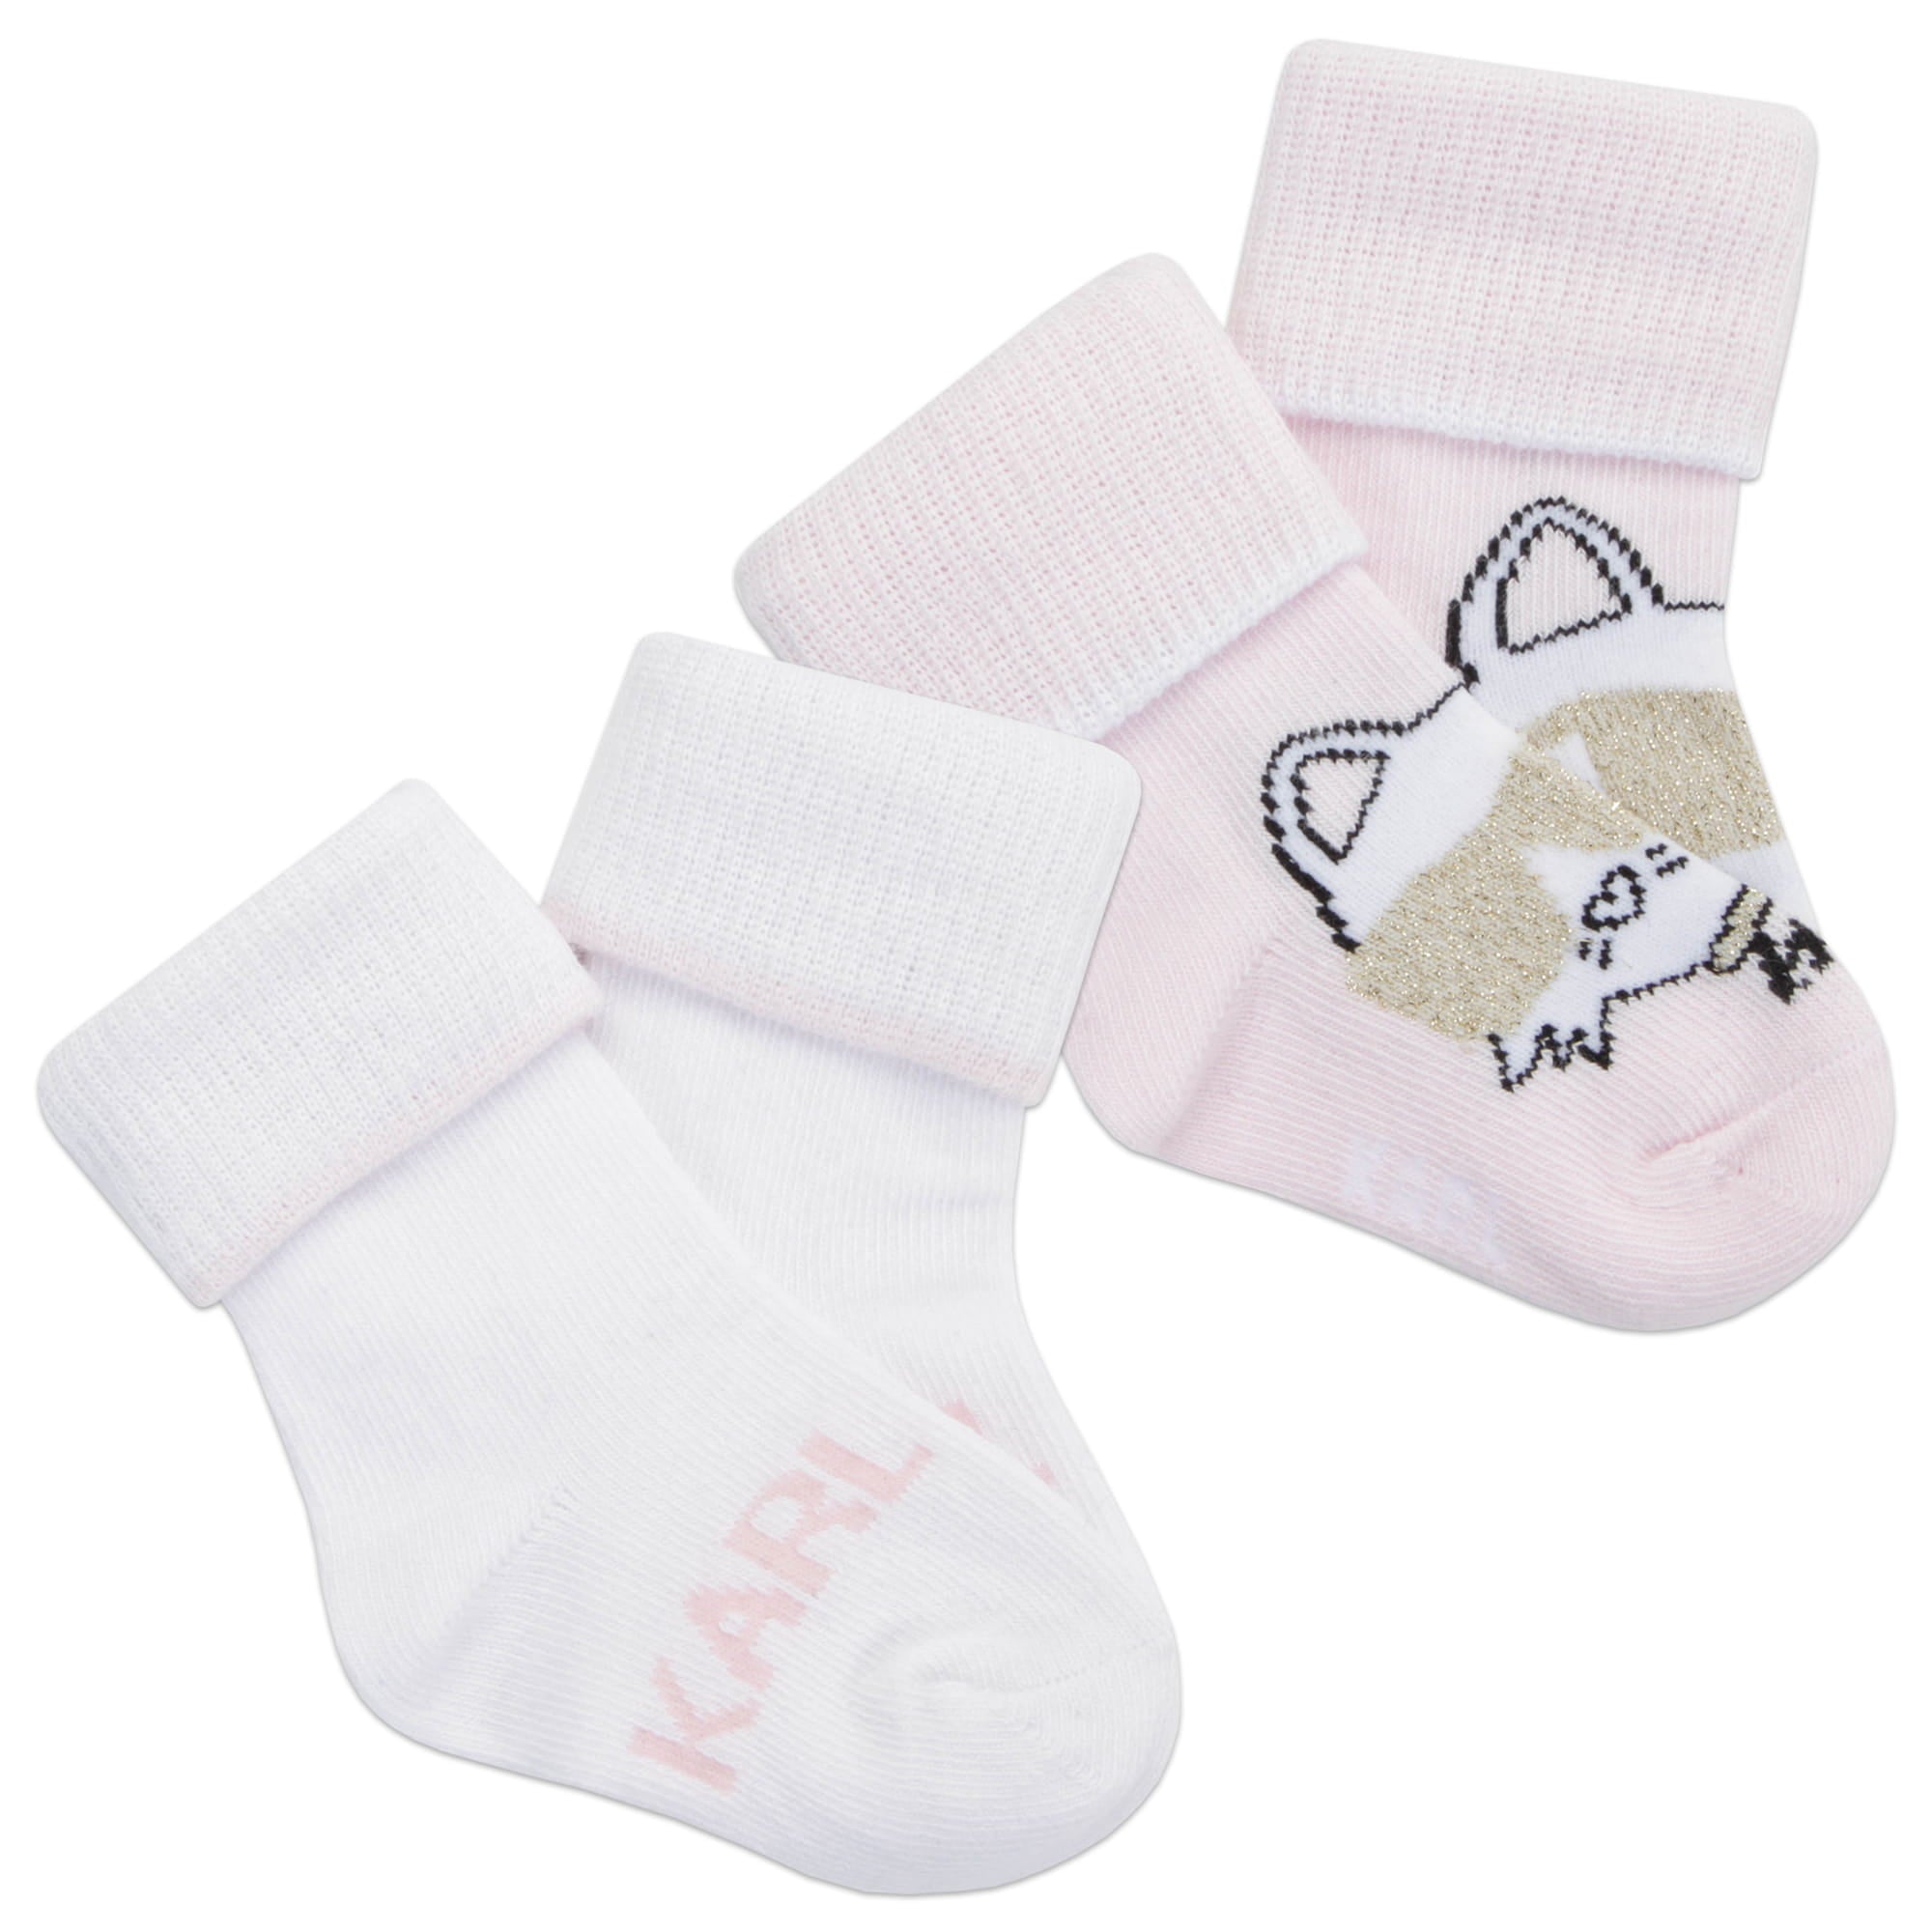 SET OF TWO PAIRS OF SOCKS